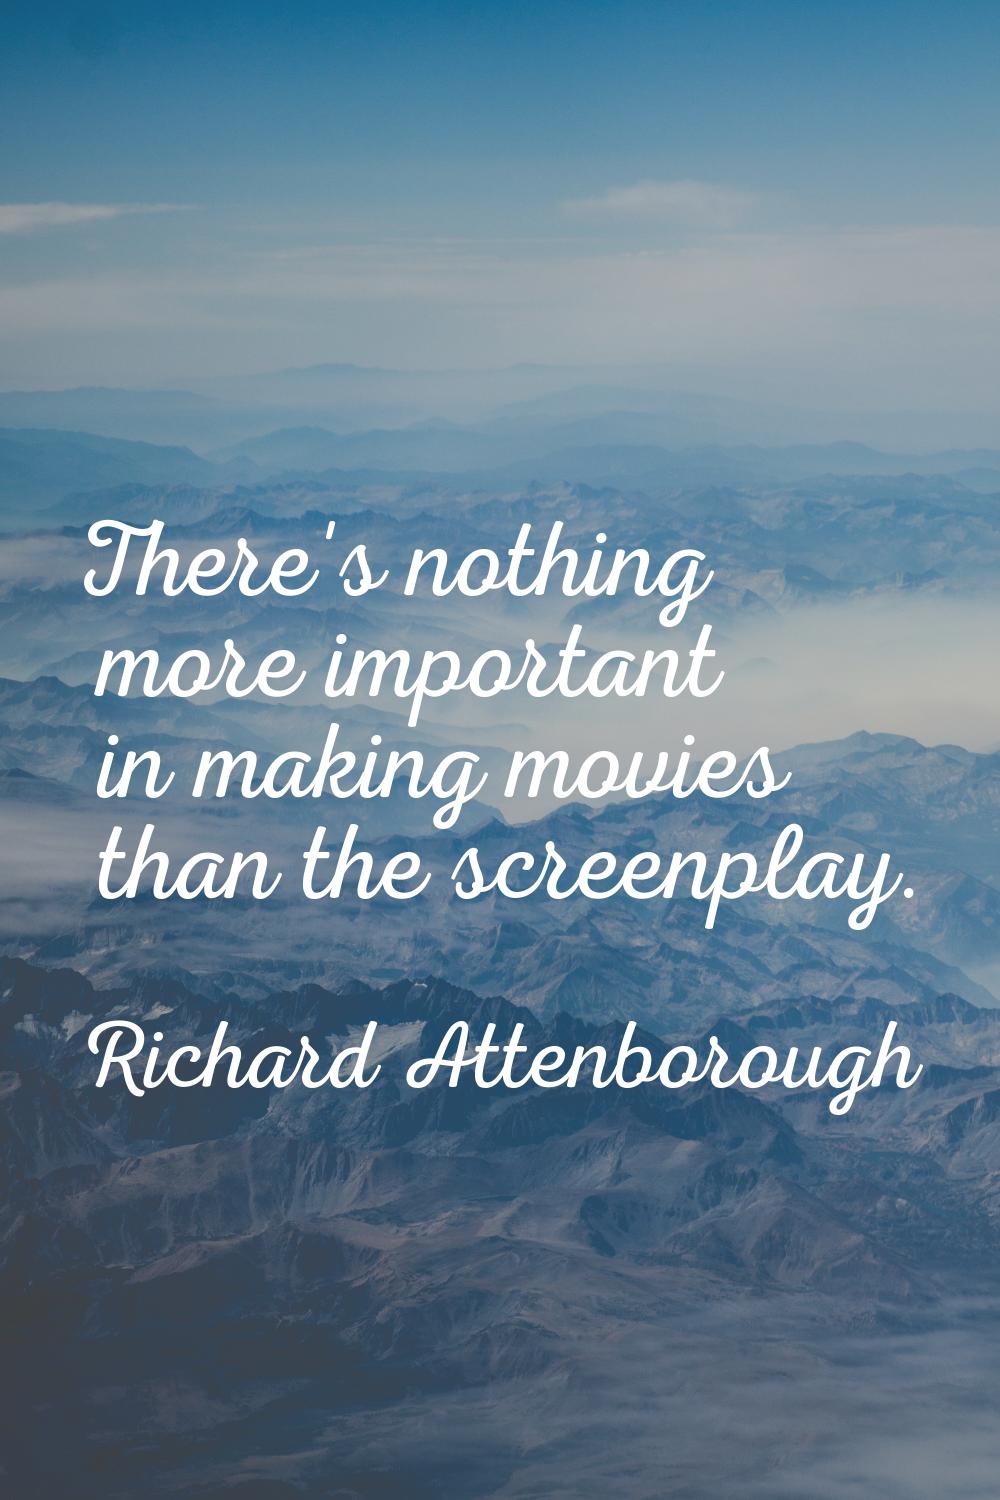 There's nothing more important in making movies than the screenplay.